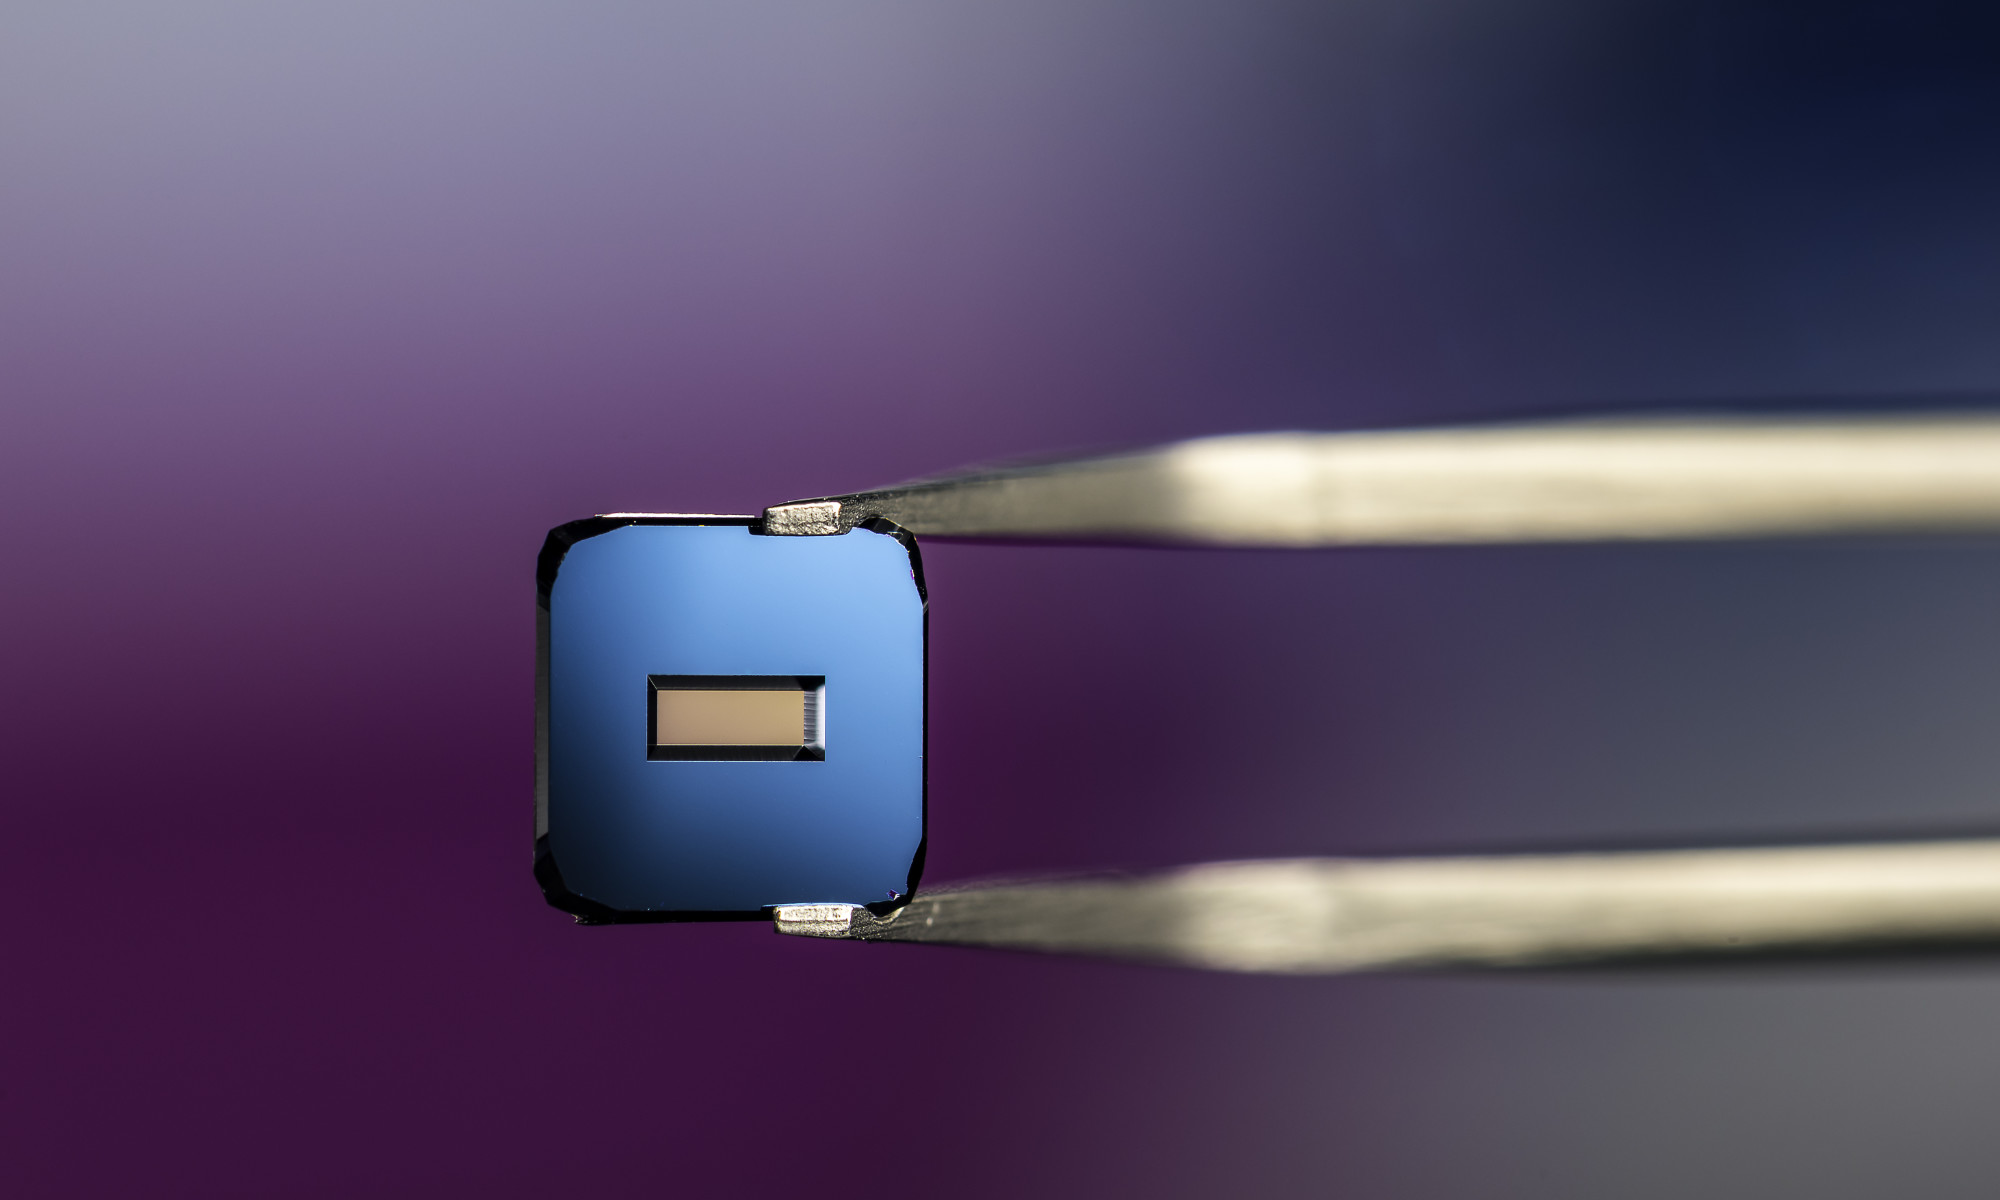 Close-up of tweezers holding µSiM chip of the kind University of Rochester’s Translational Center for Barrier Microphysiological Systems (TraCe-bMPS).